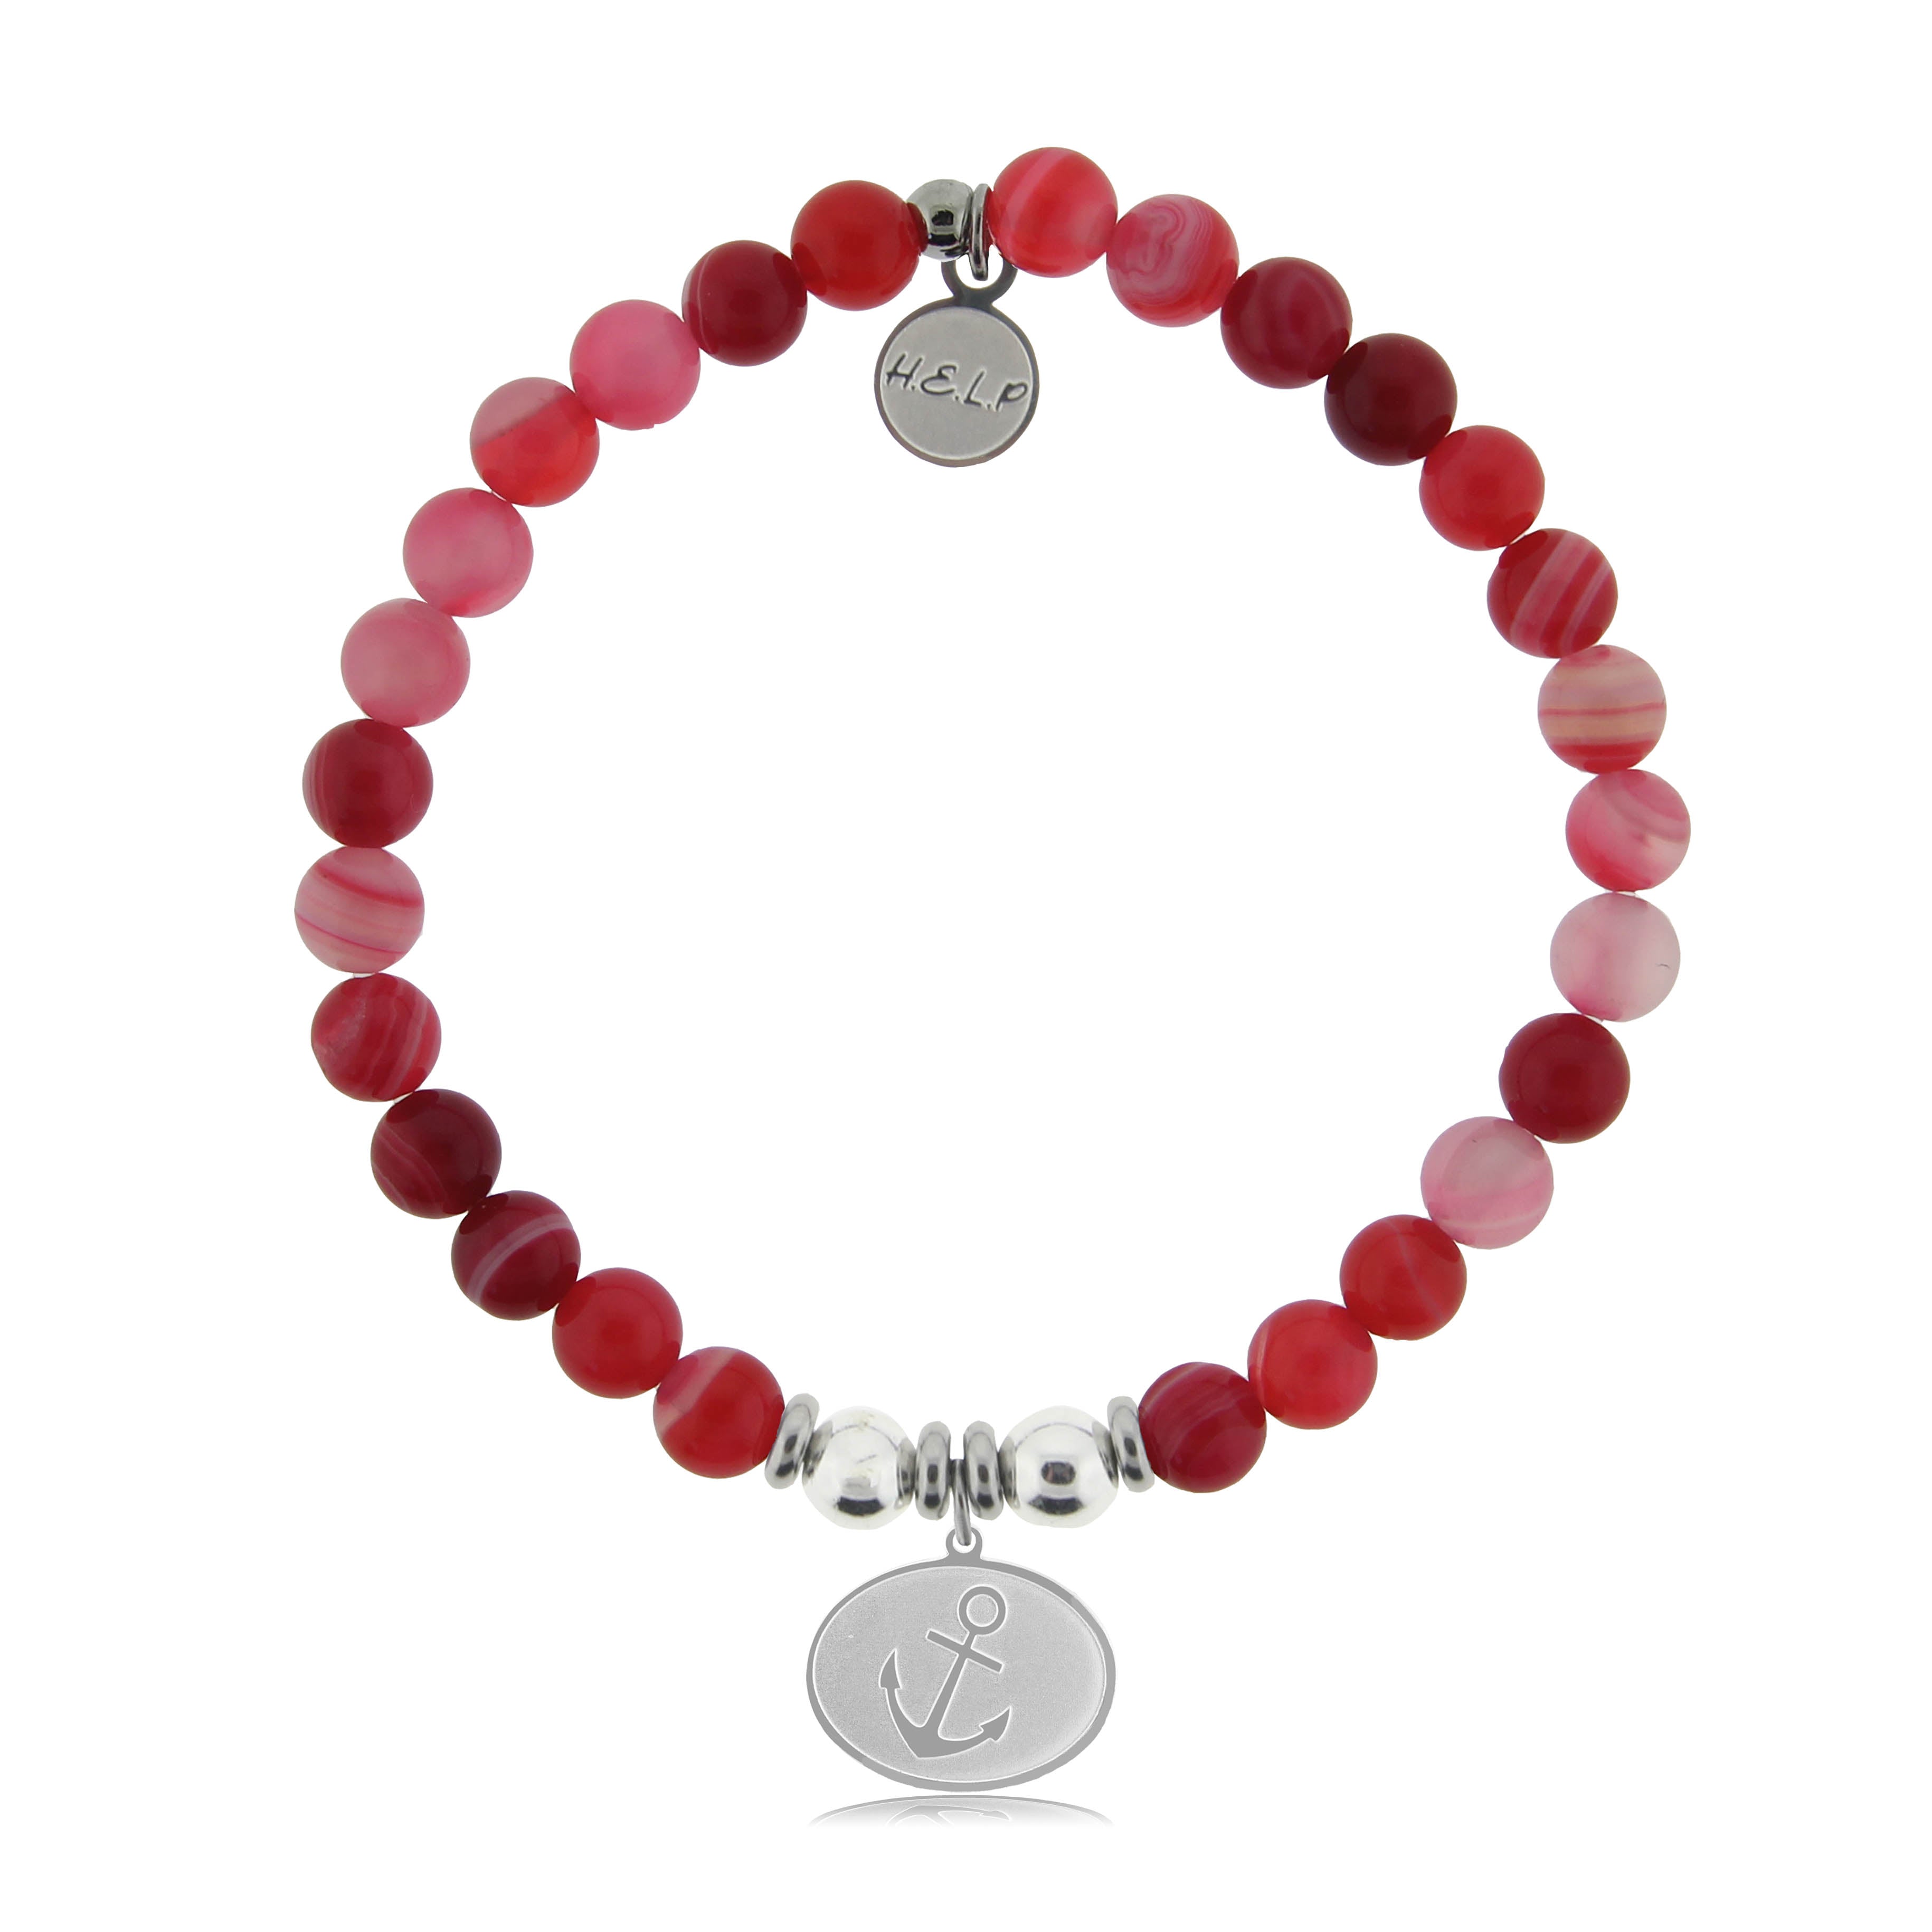 HELP by TJ Anchor Charm with Red Stripe Agate Charity Bracelet